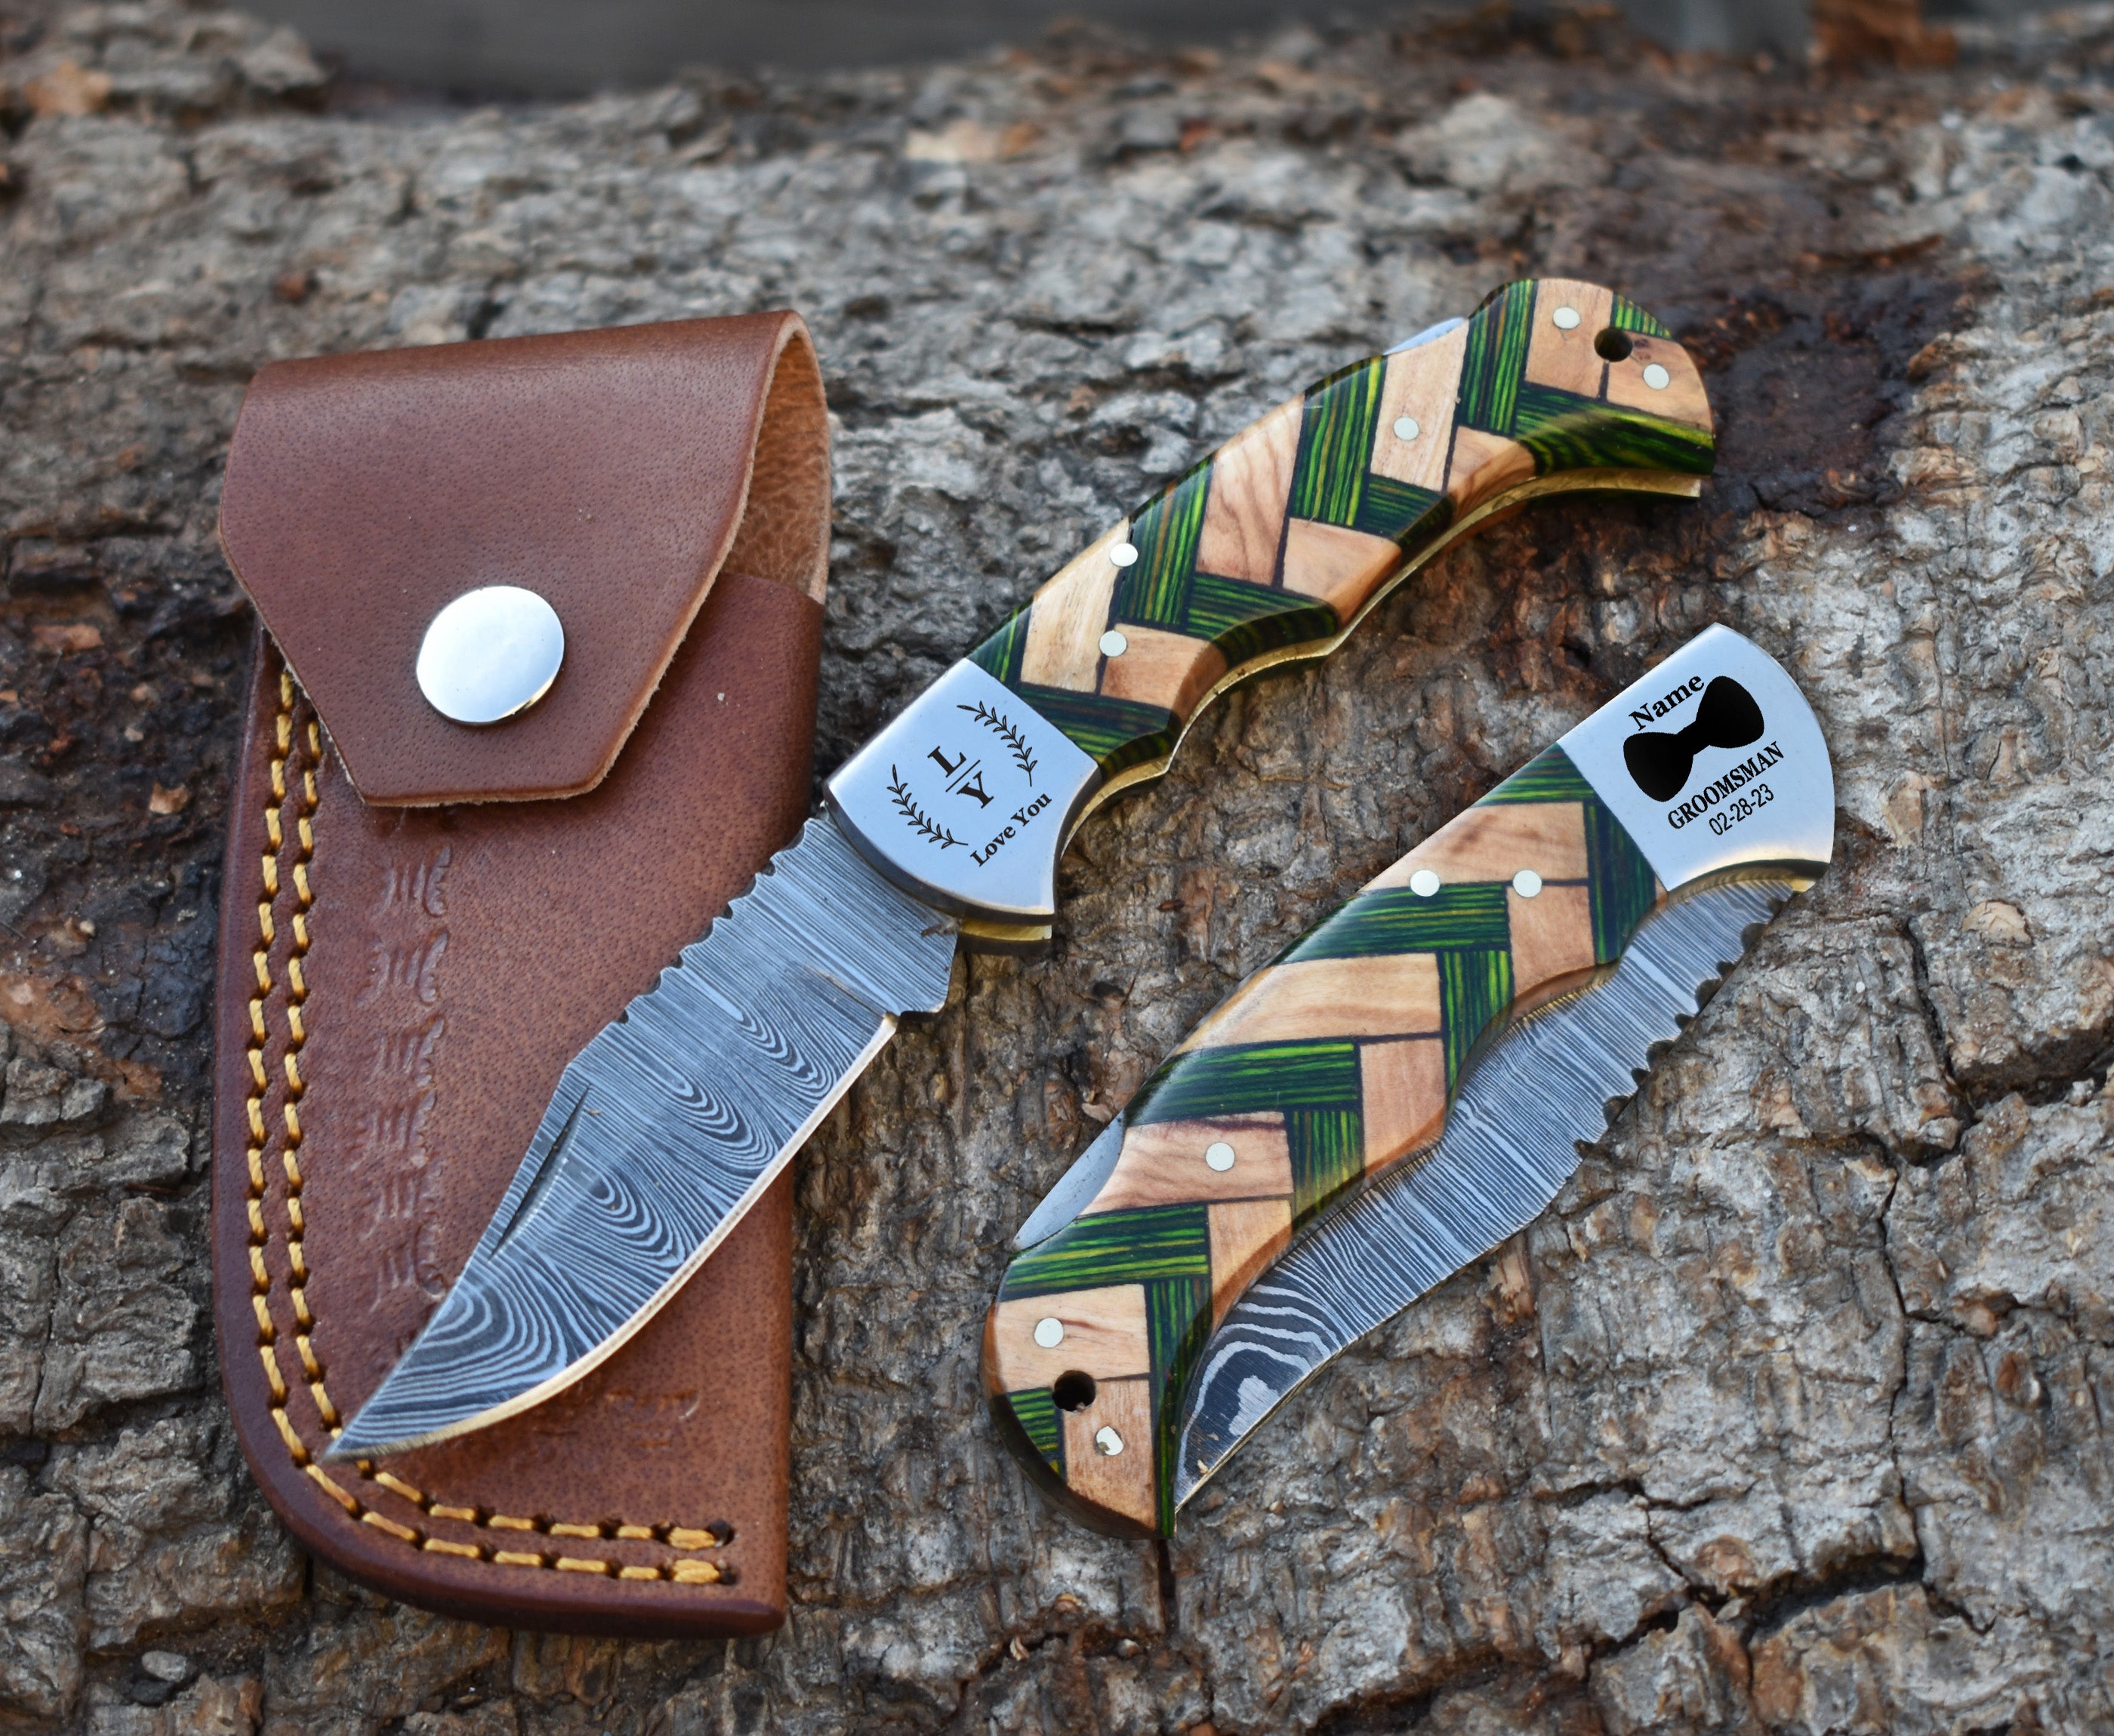 6.5" Handmade Damascus Steel Folding Knife Green Pakka Wood & Olive wood Handle Back Lock Pocket Knife With Leather Pouch Personalized Gift for Men.